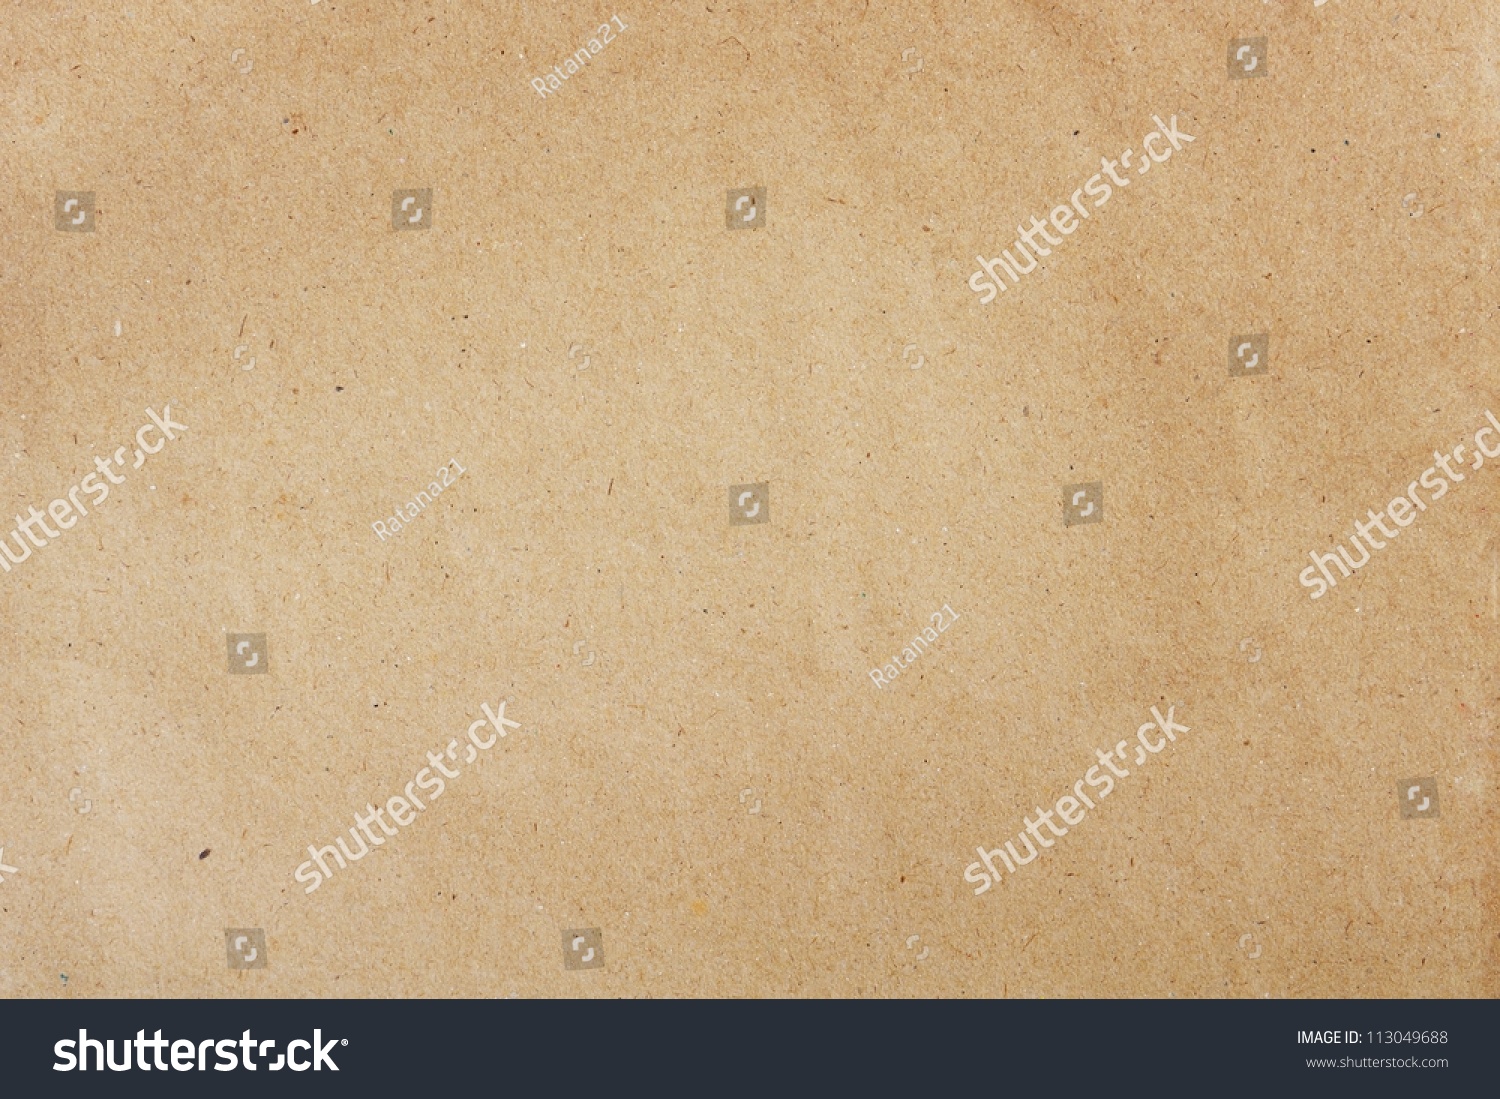 Old brown paper texture #113049688